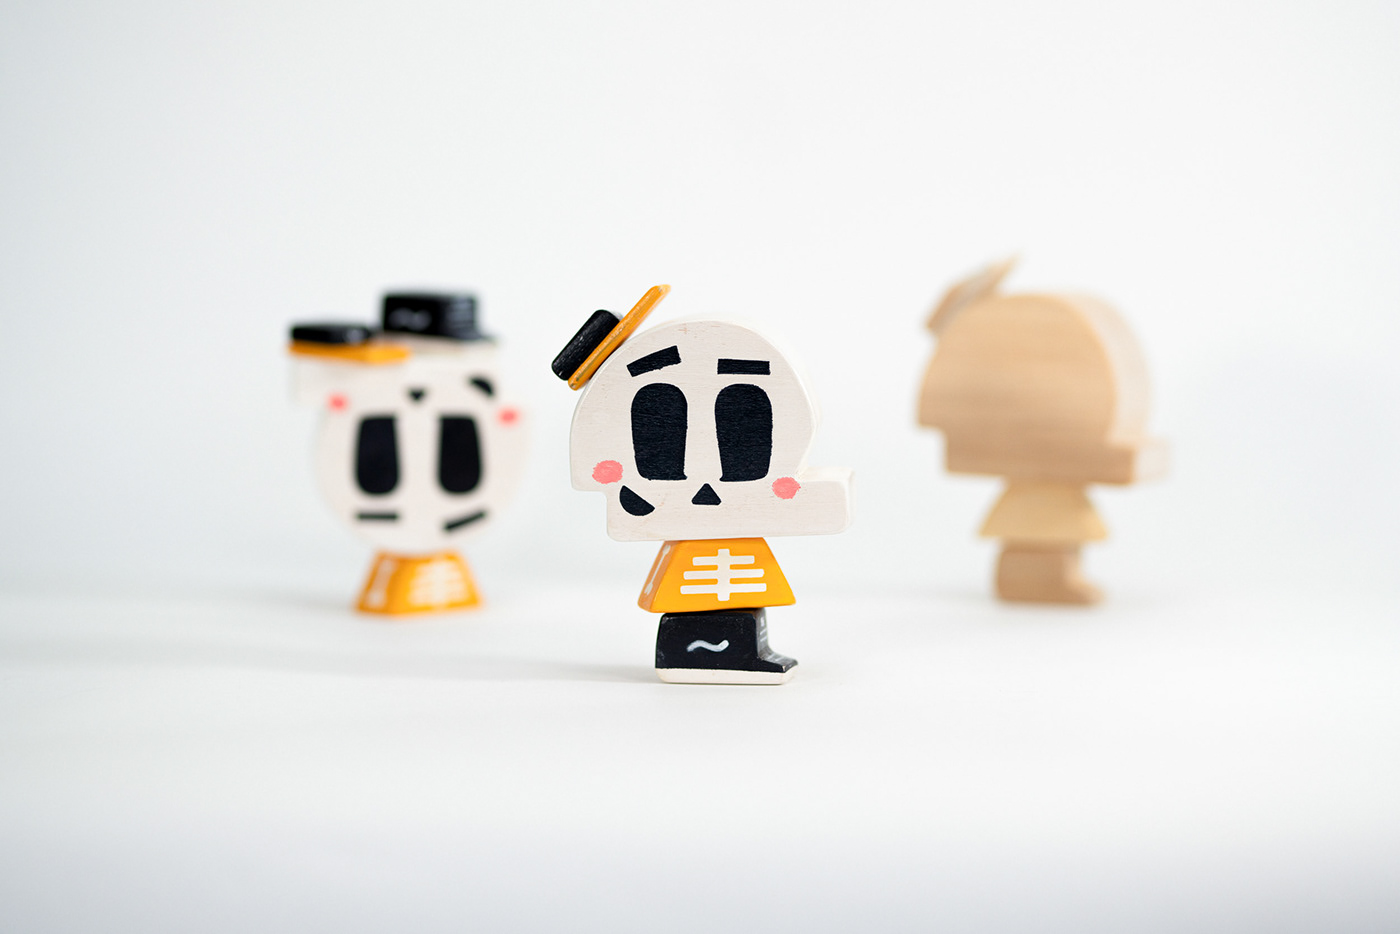 skully center stage as a wooden block toy with two other versions in the background.